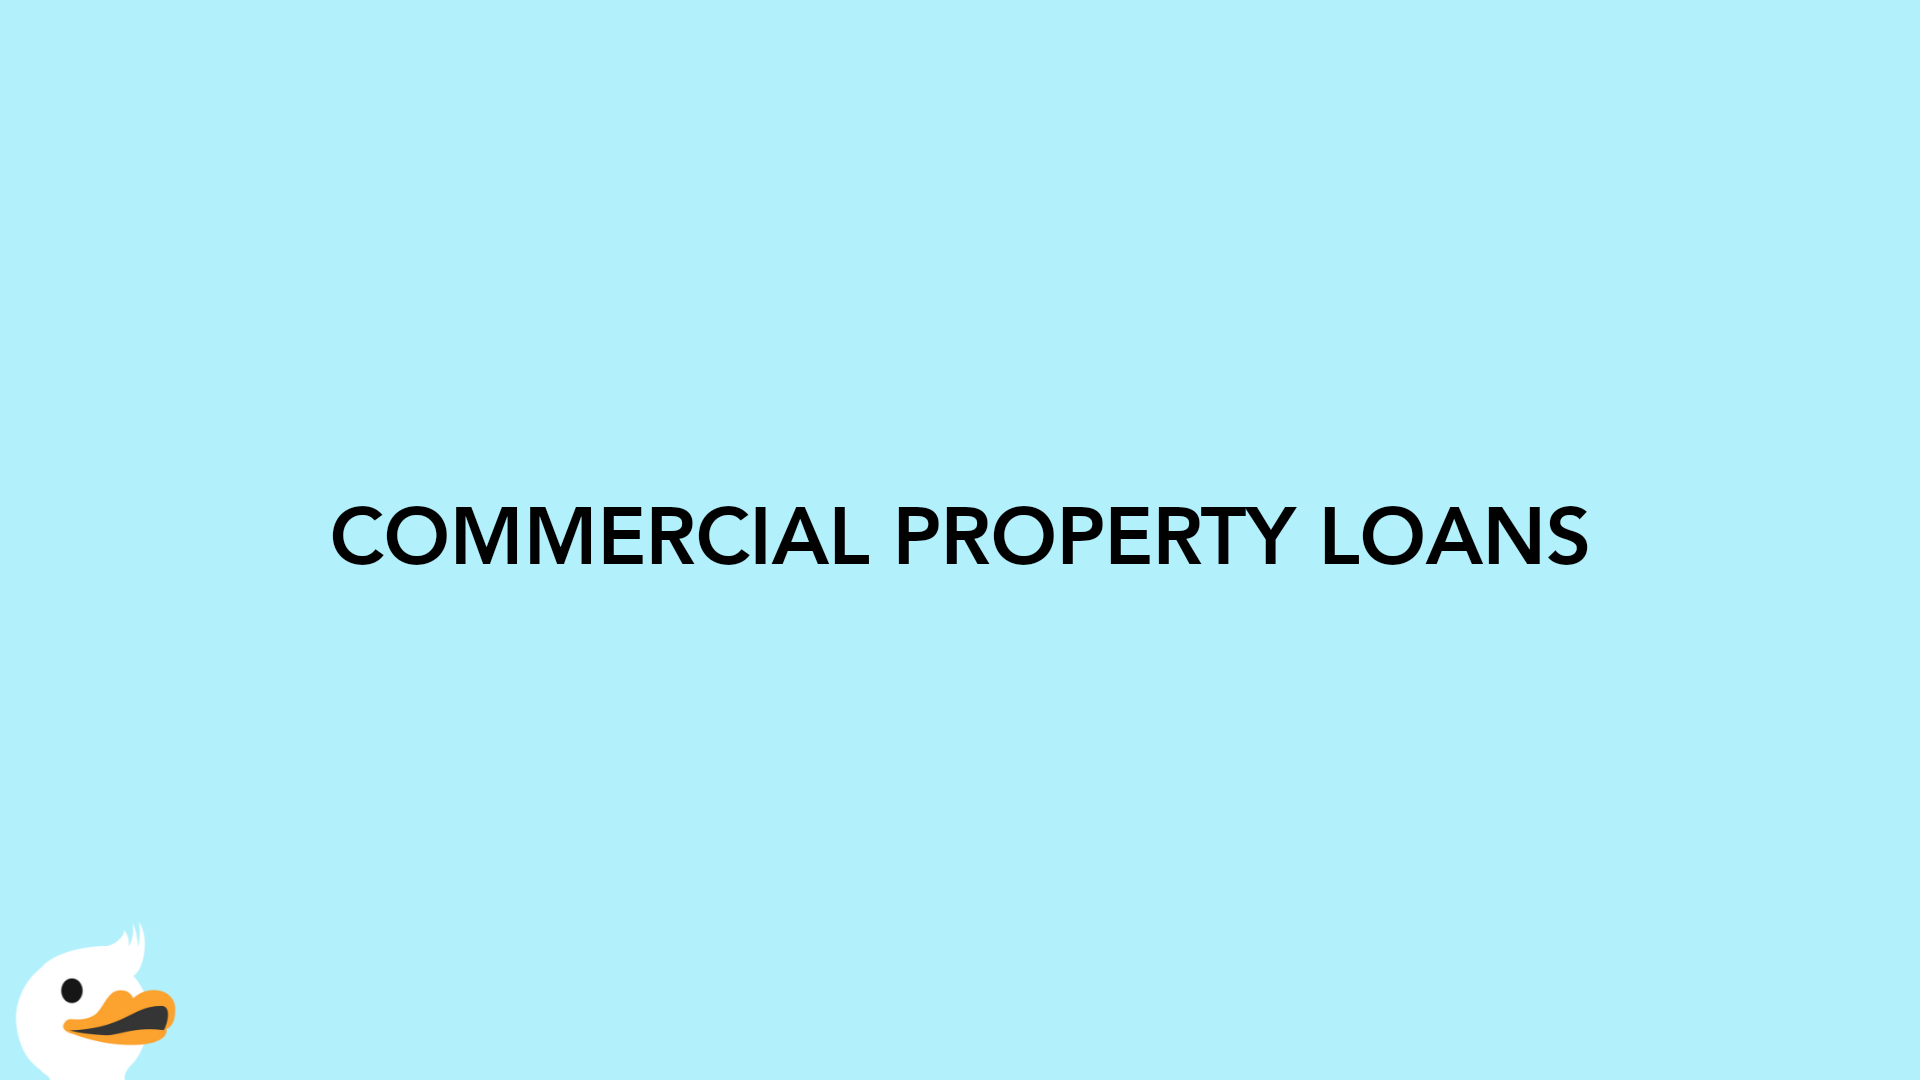 COMMERCIAL PROPERTY LOANS